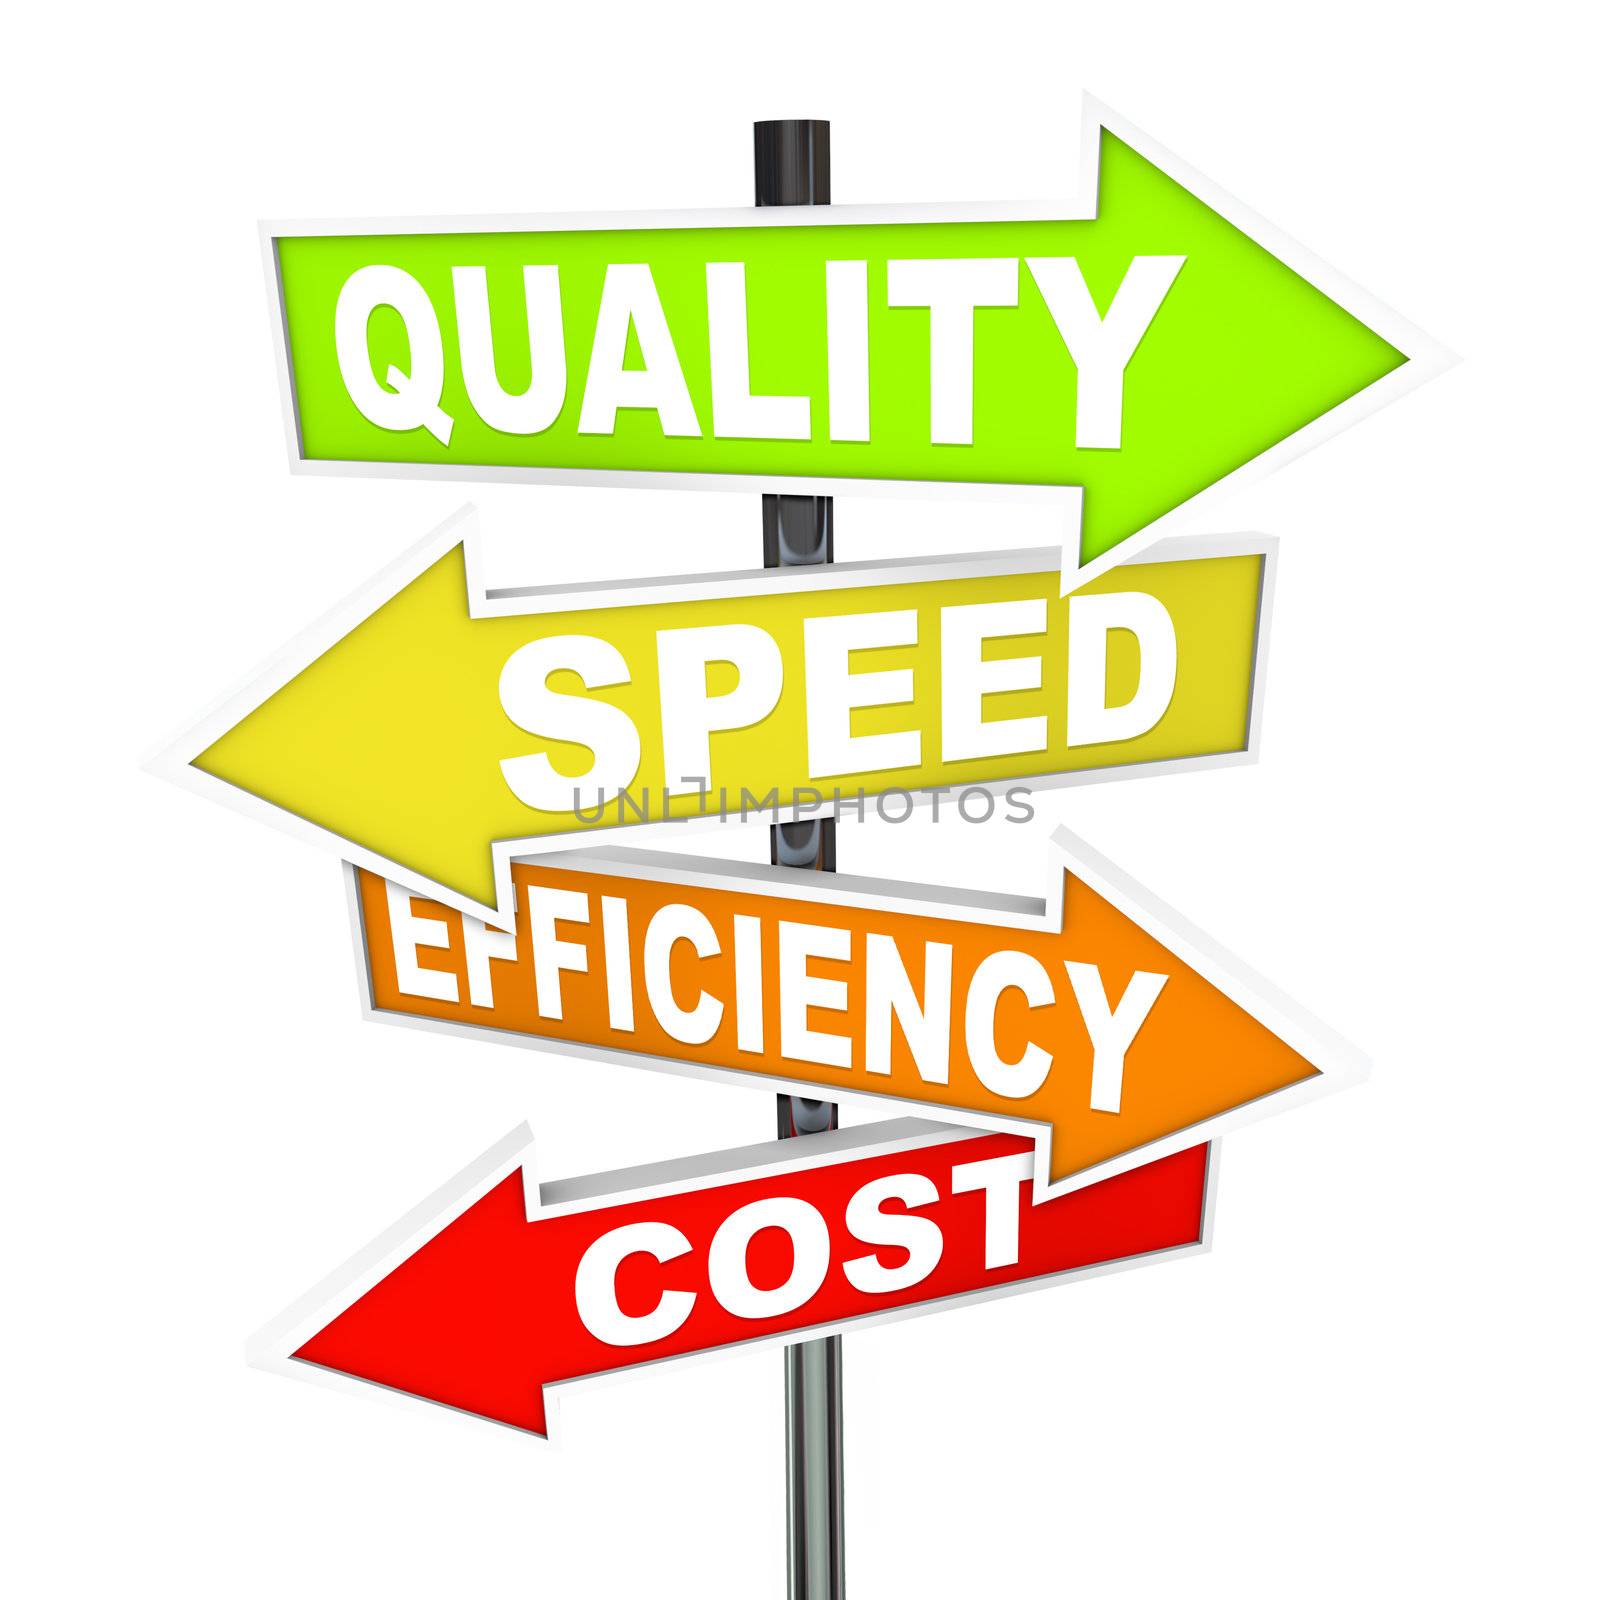 Several colorful arrow signs pointing in different directions representing different priorities in managing production processes - quality, speed, efficiency, and cost